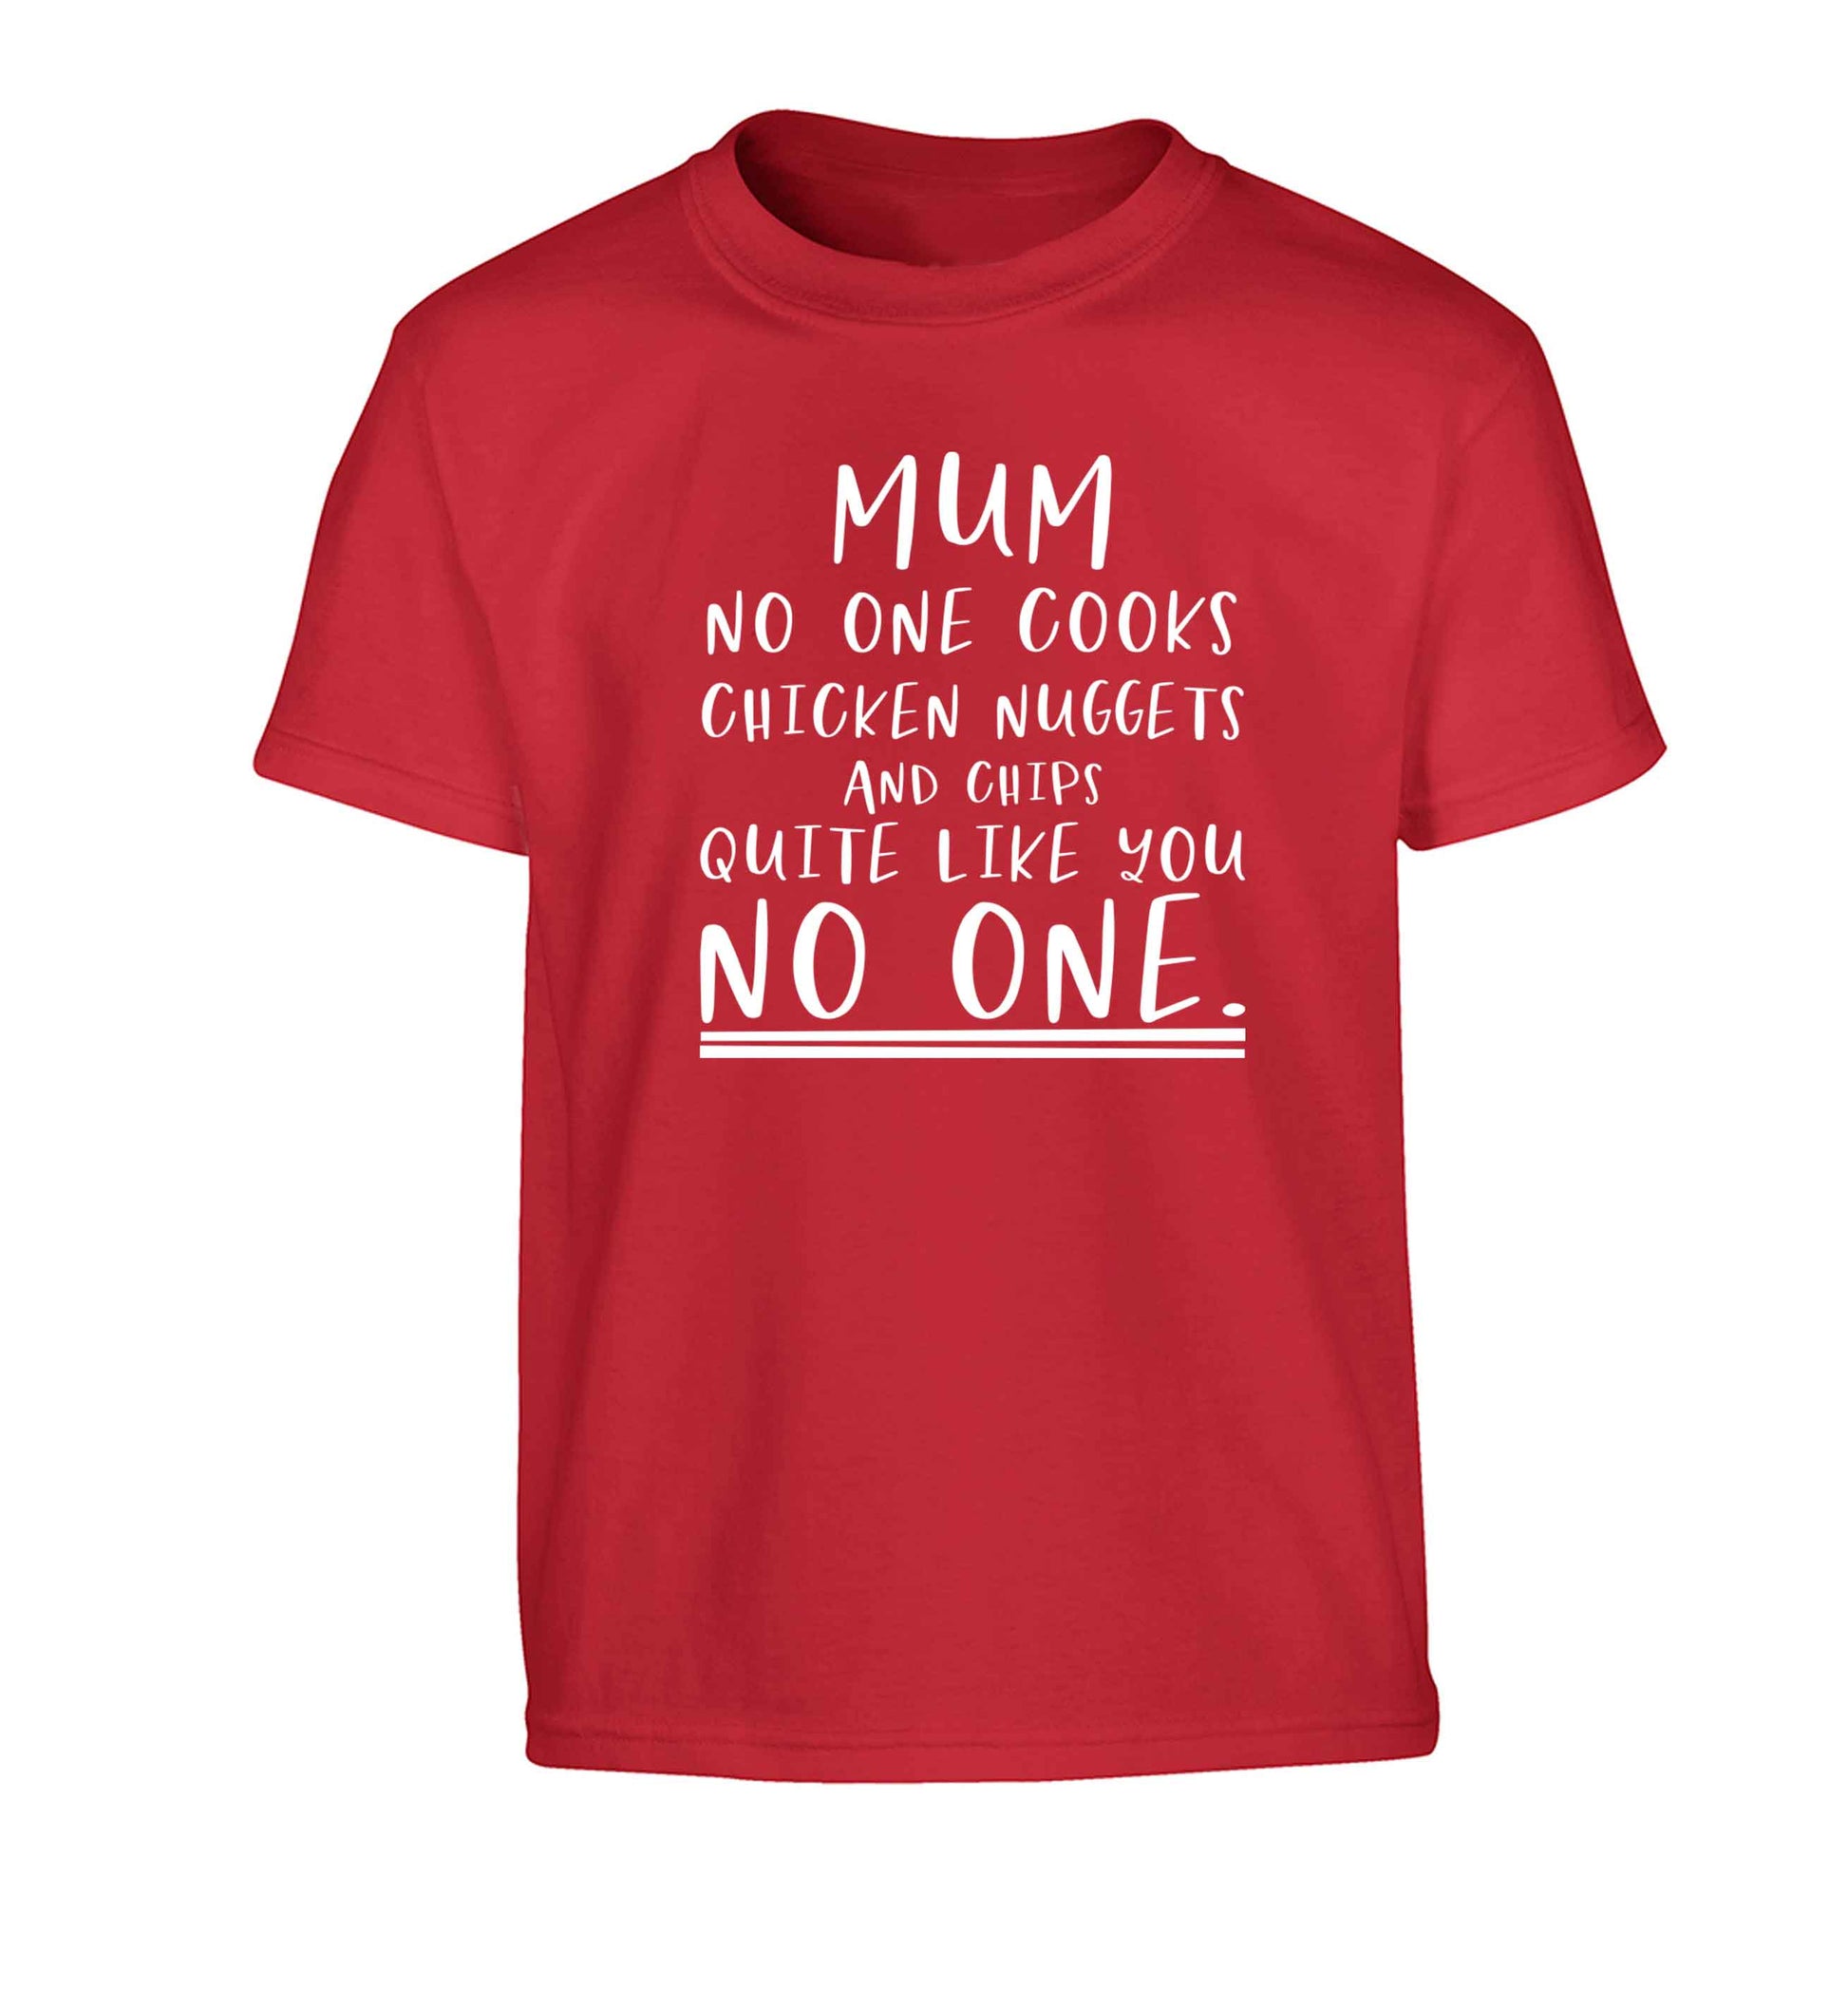 Super funny sassy gift for mother's day or birthday!  Mum no one cooks chicken nuggets and chips like you no one Children's red Tshirt 12-13 Years